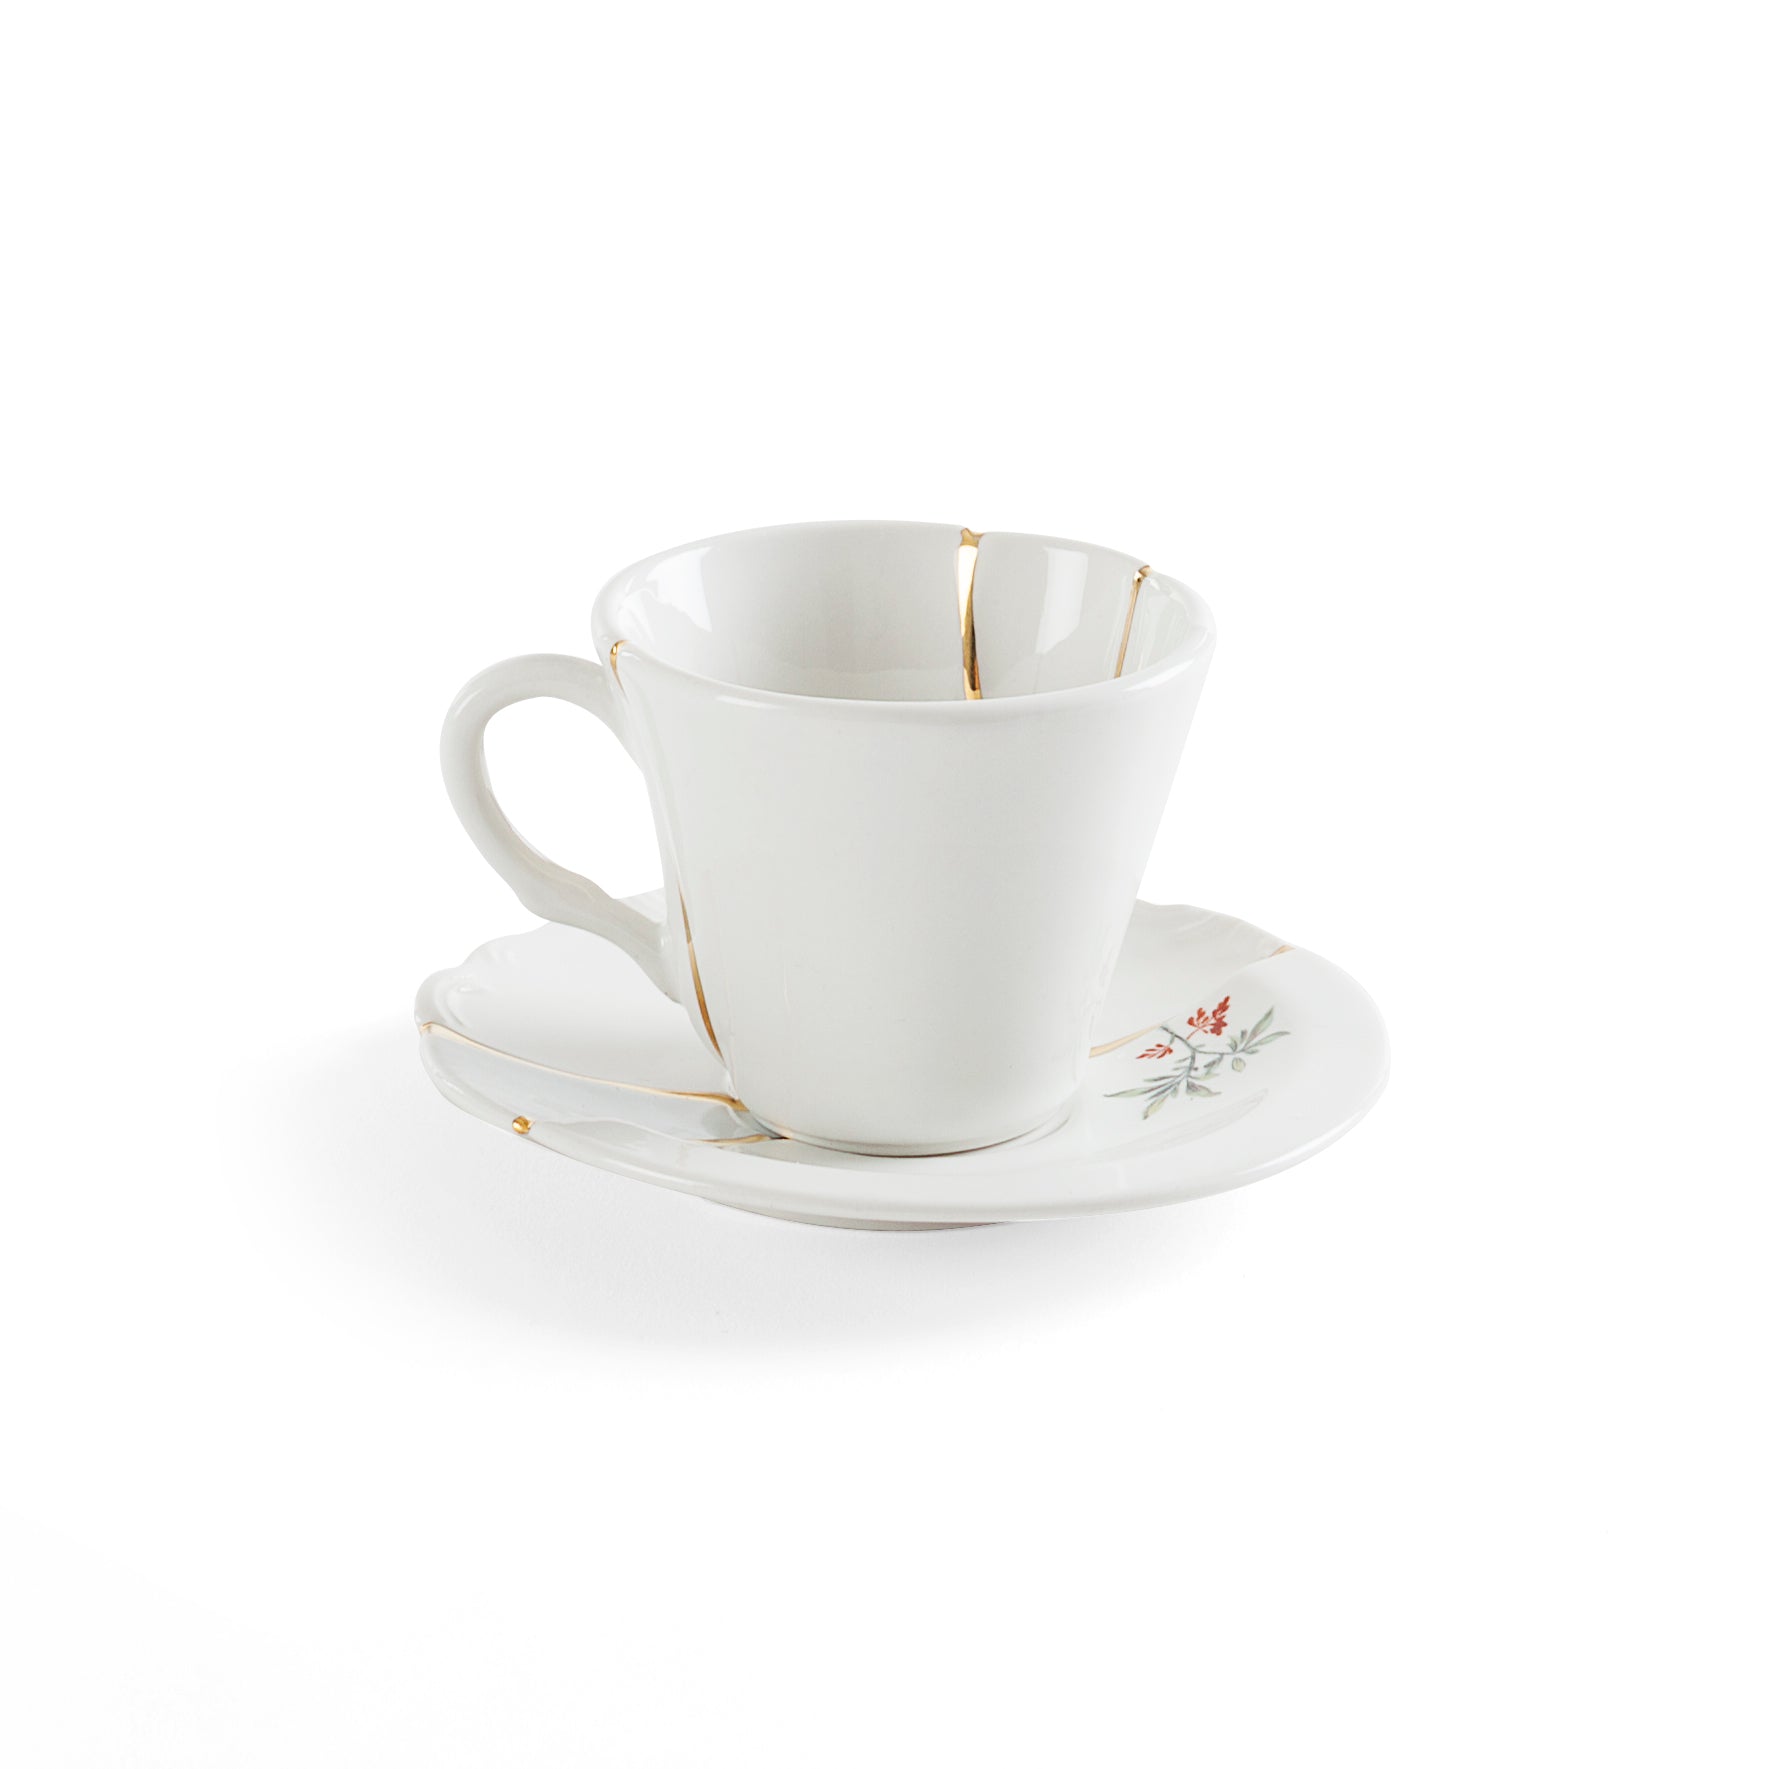 Seletti Kintsugi n°3 Coffee cup and saucer in porcelain